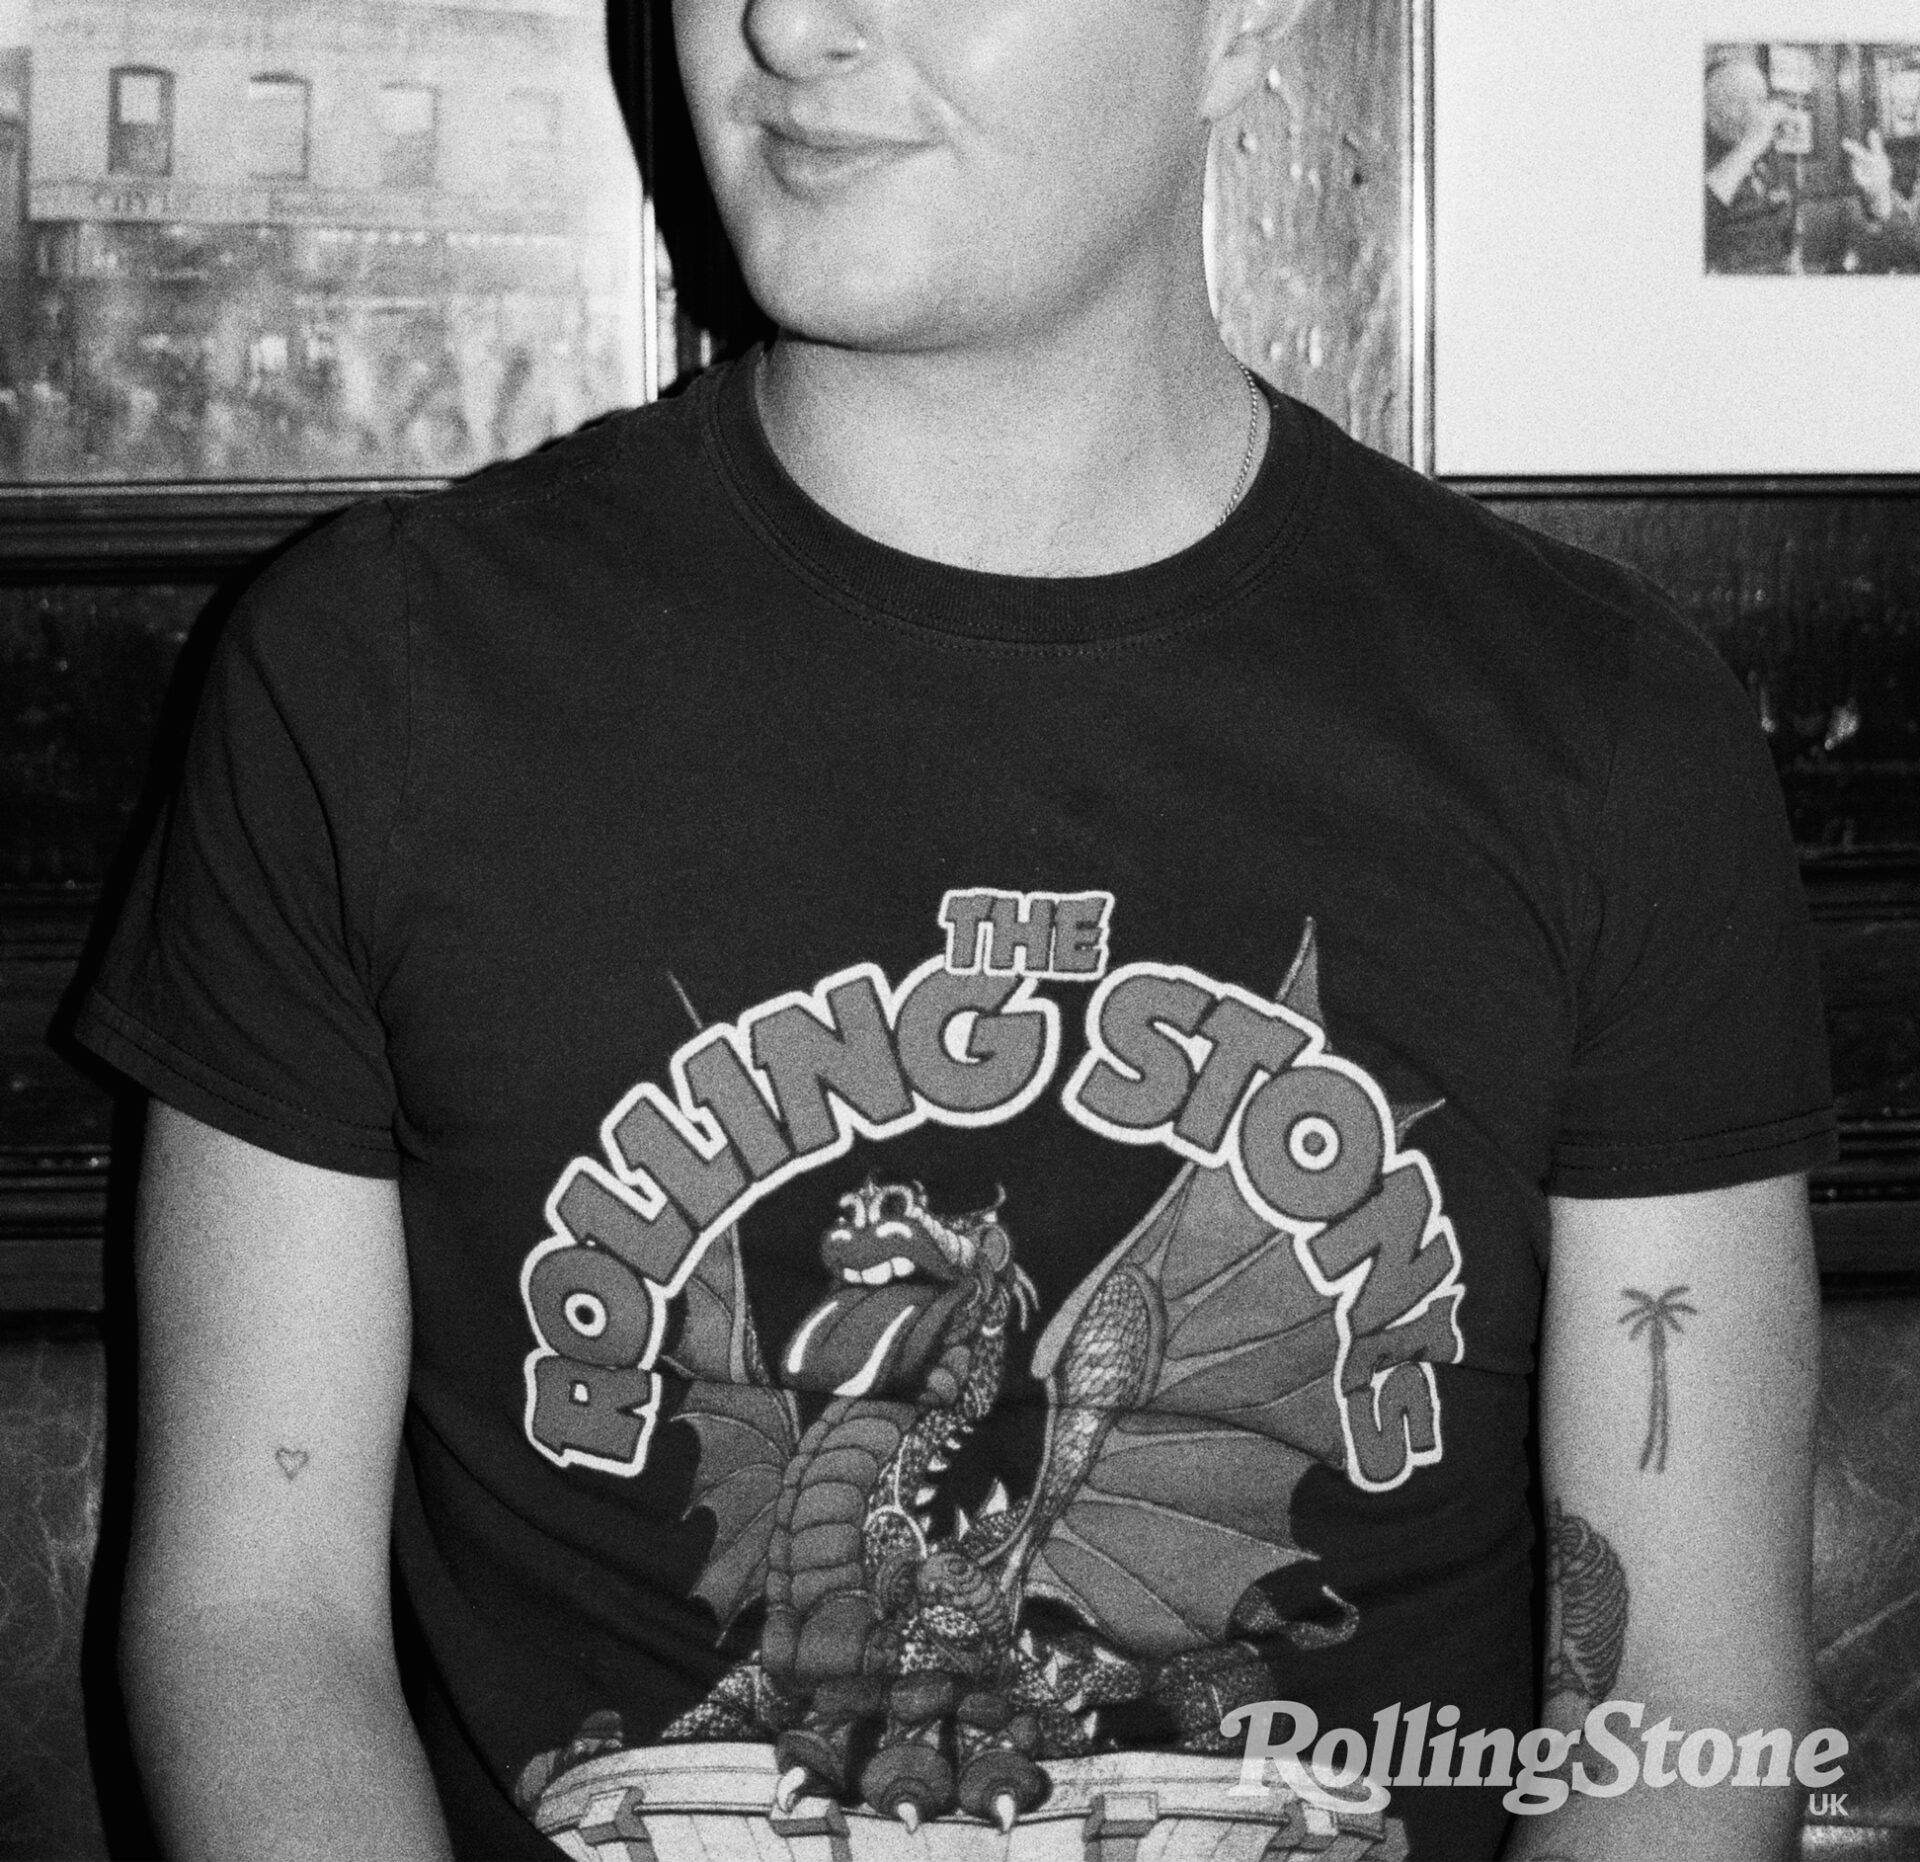 A photograph of pop singer Joesef wearing a Rolling Stones t-shirt at a pub